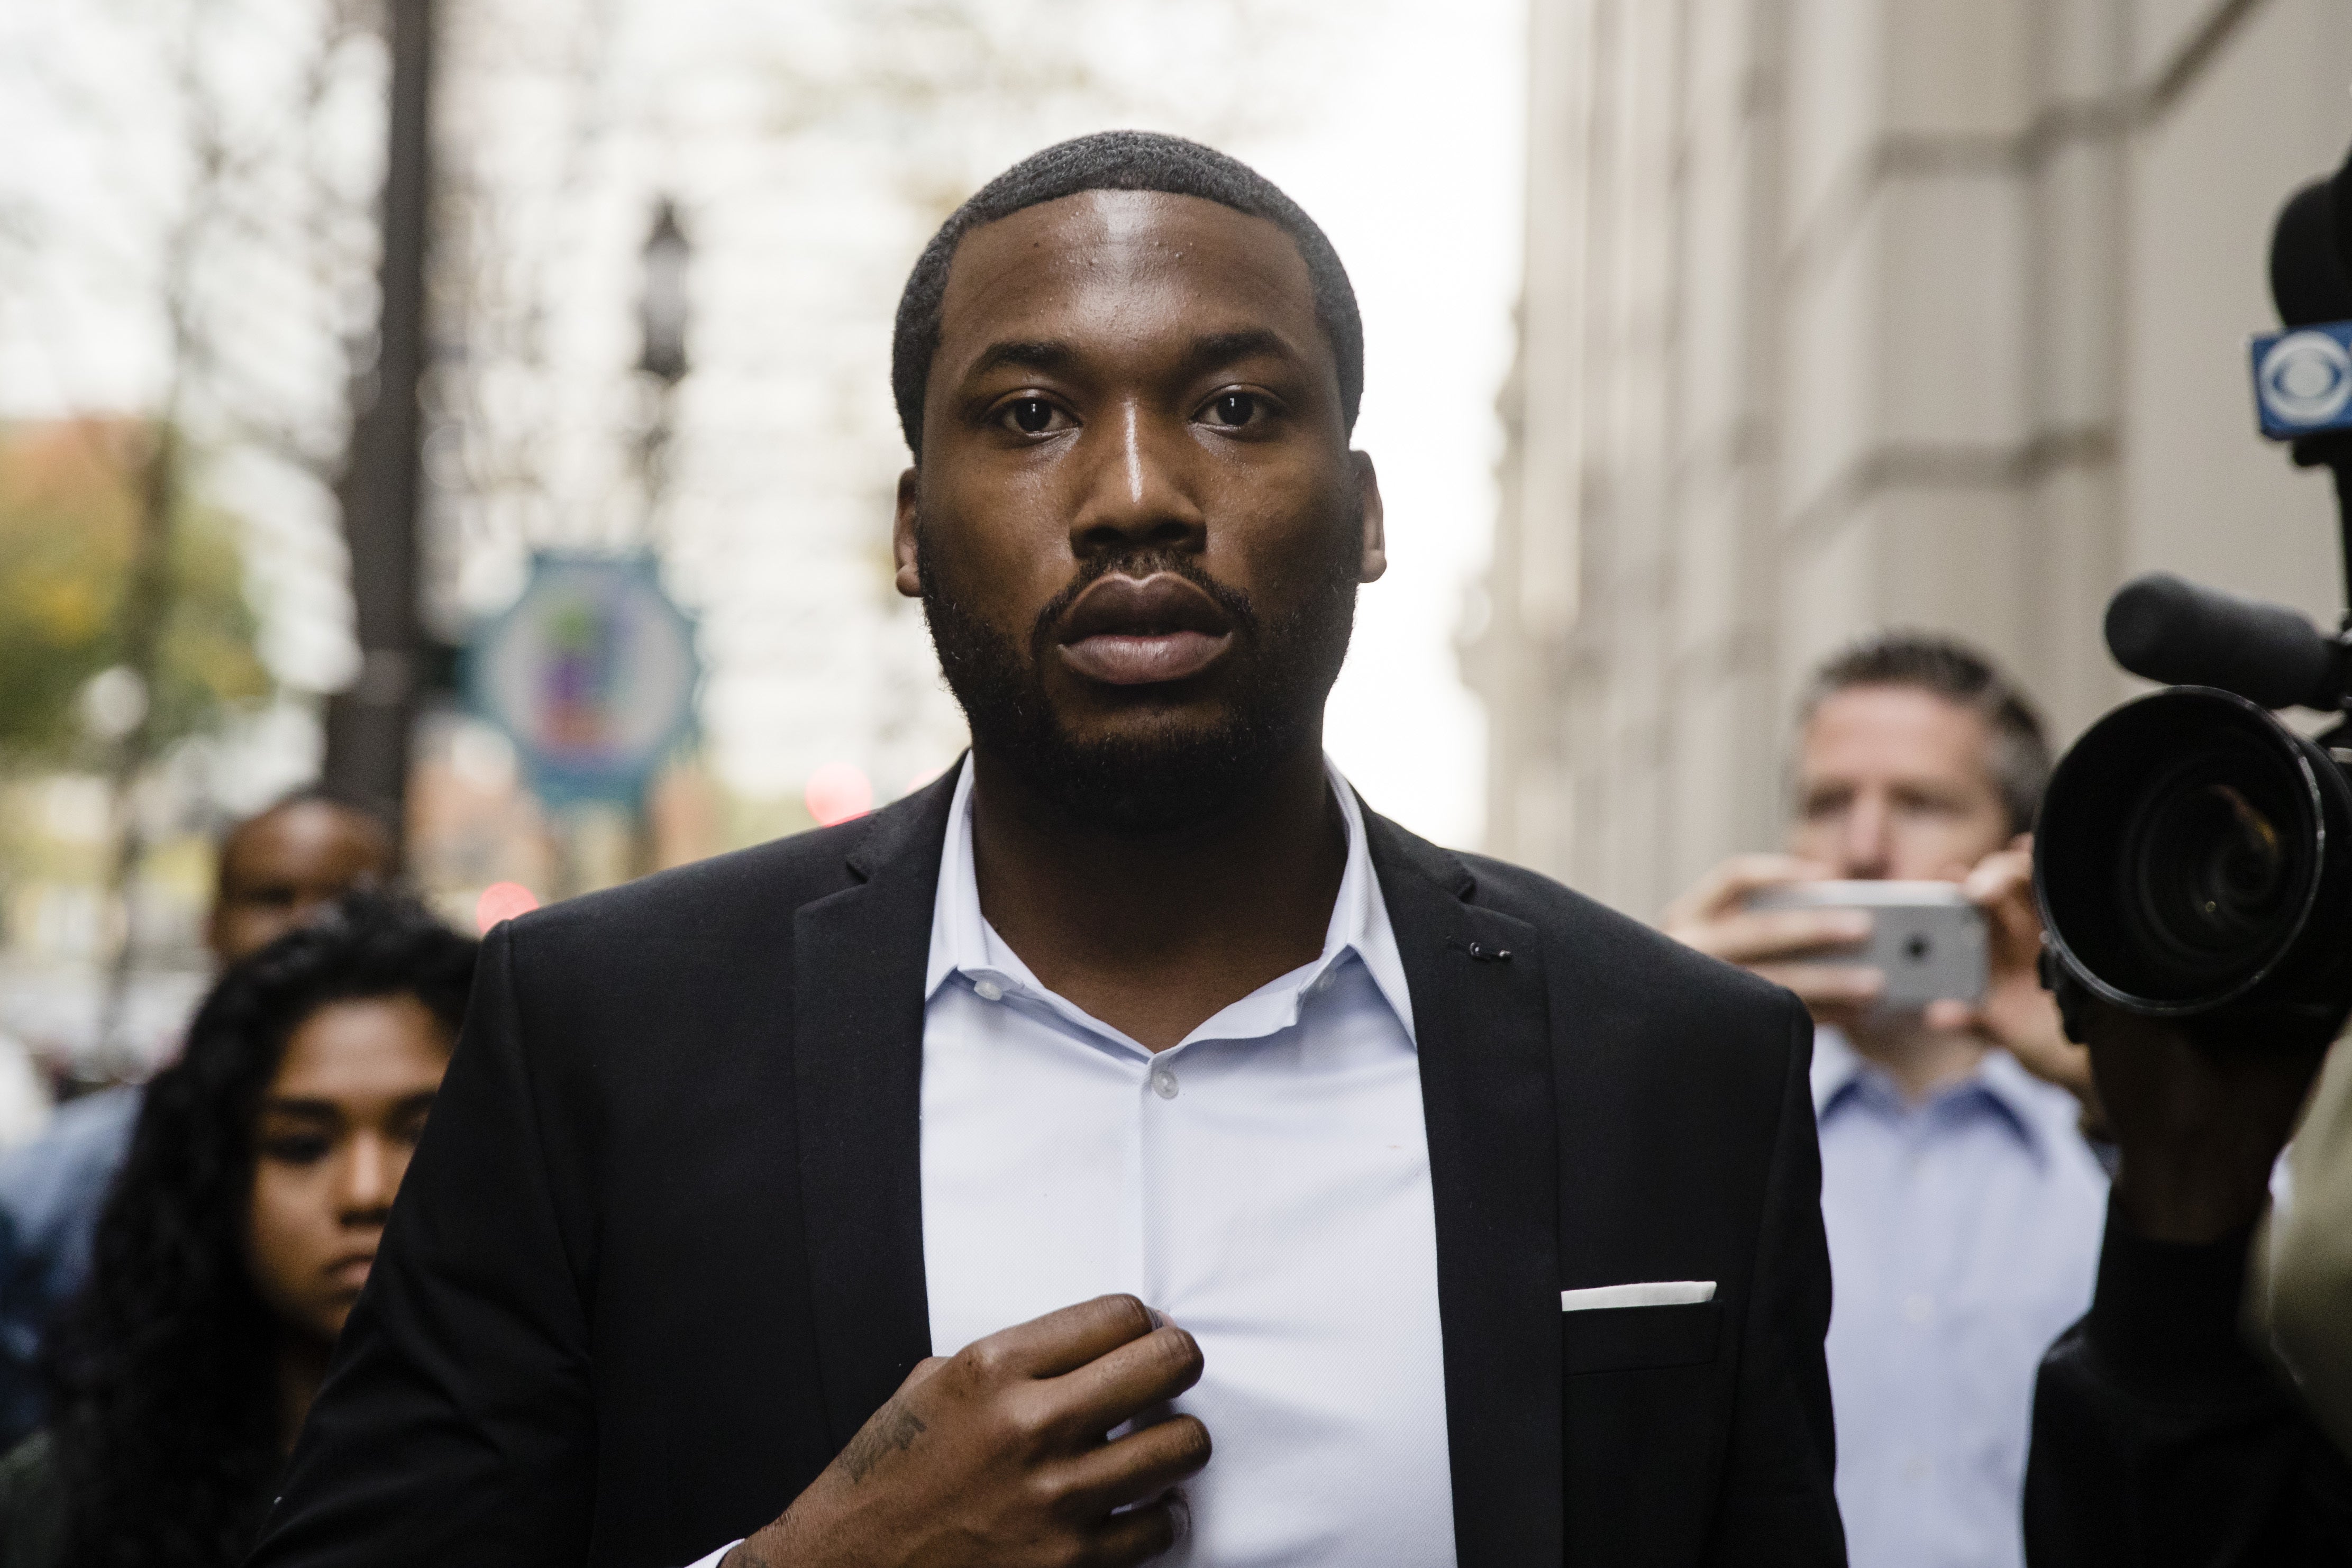 Meek Mill's Grandmother’s House Vandalized With Racial Slurs